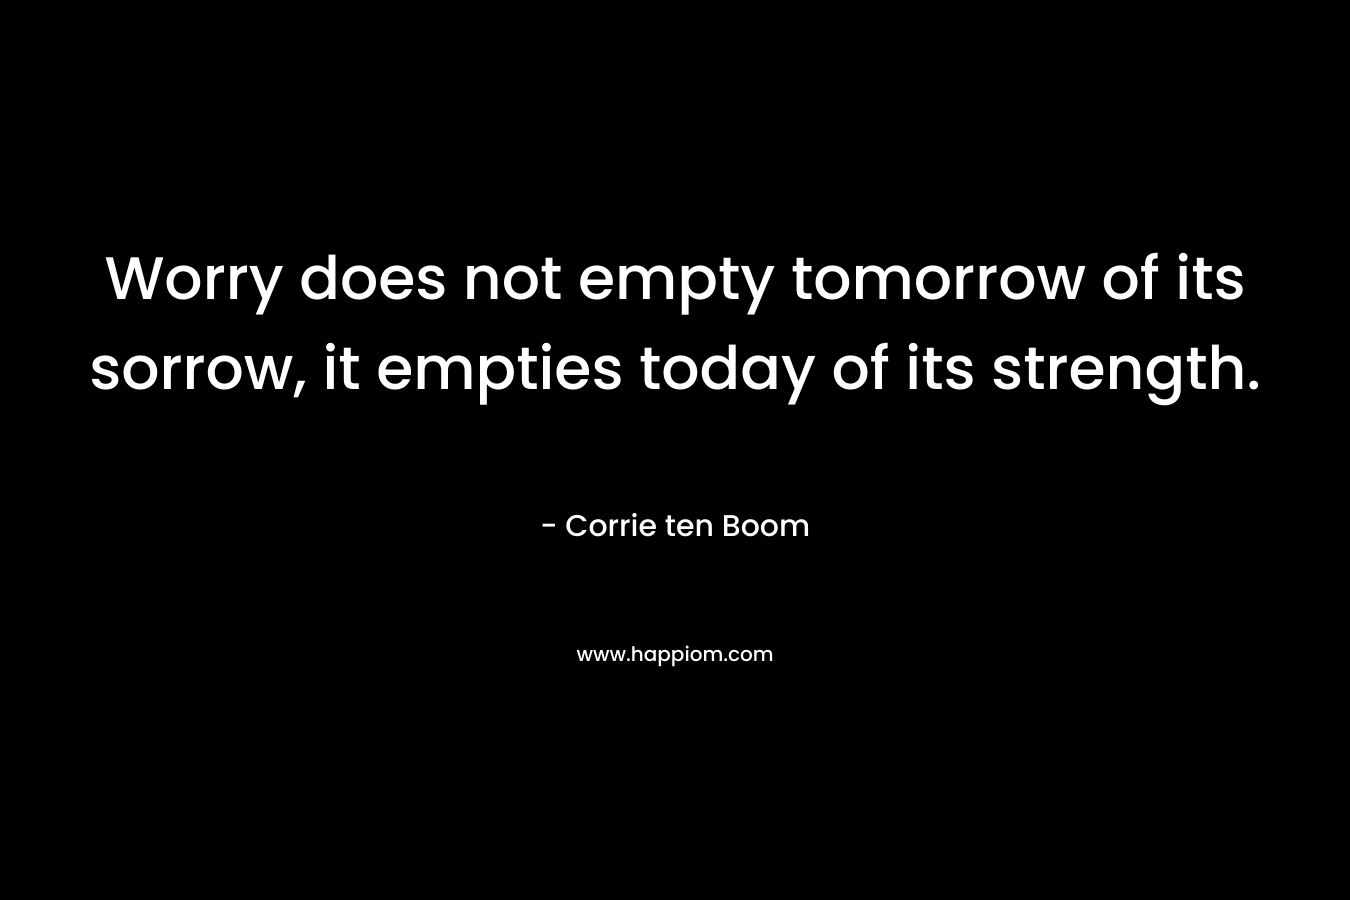 Worry does not empty tomorrow of its sorrow, it empties today of its strength.